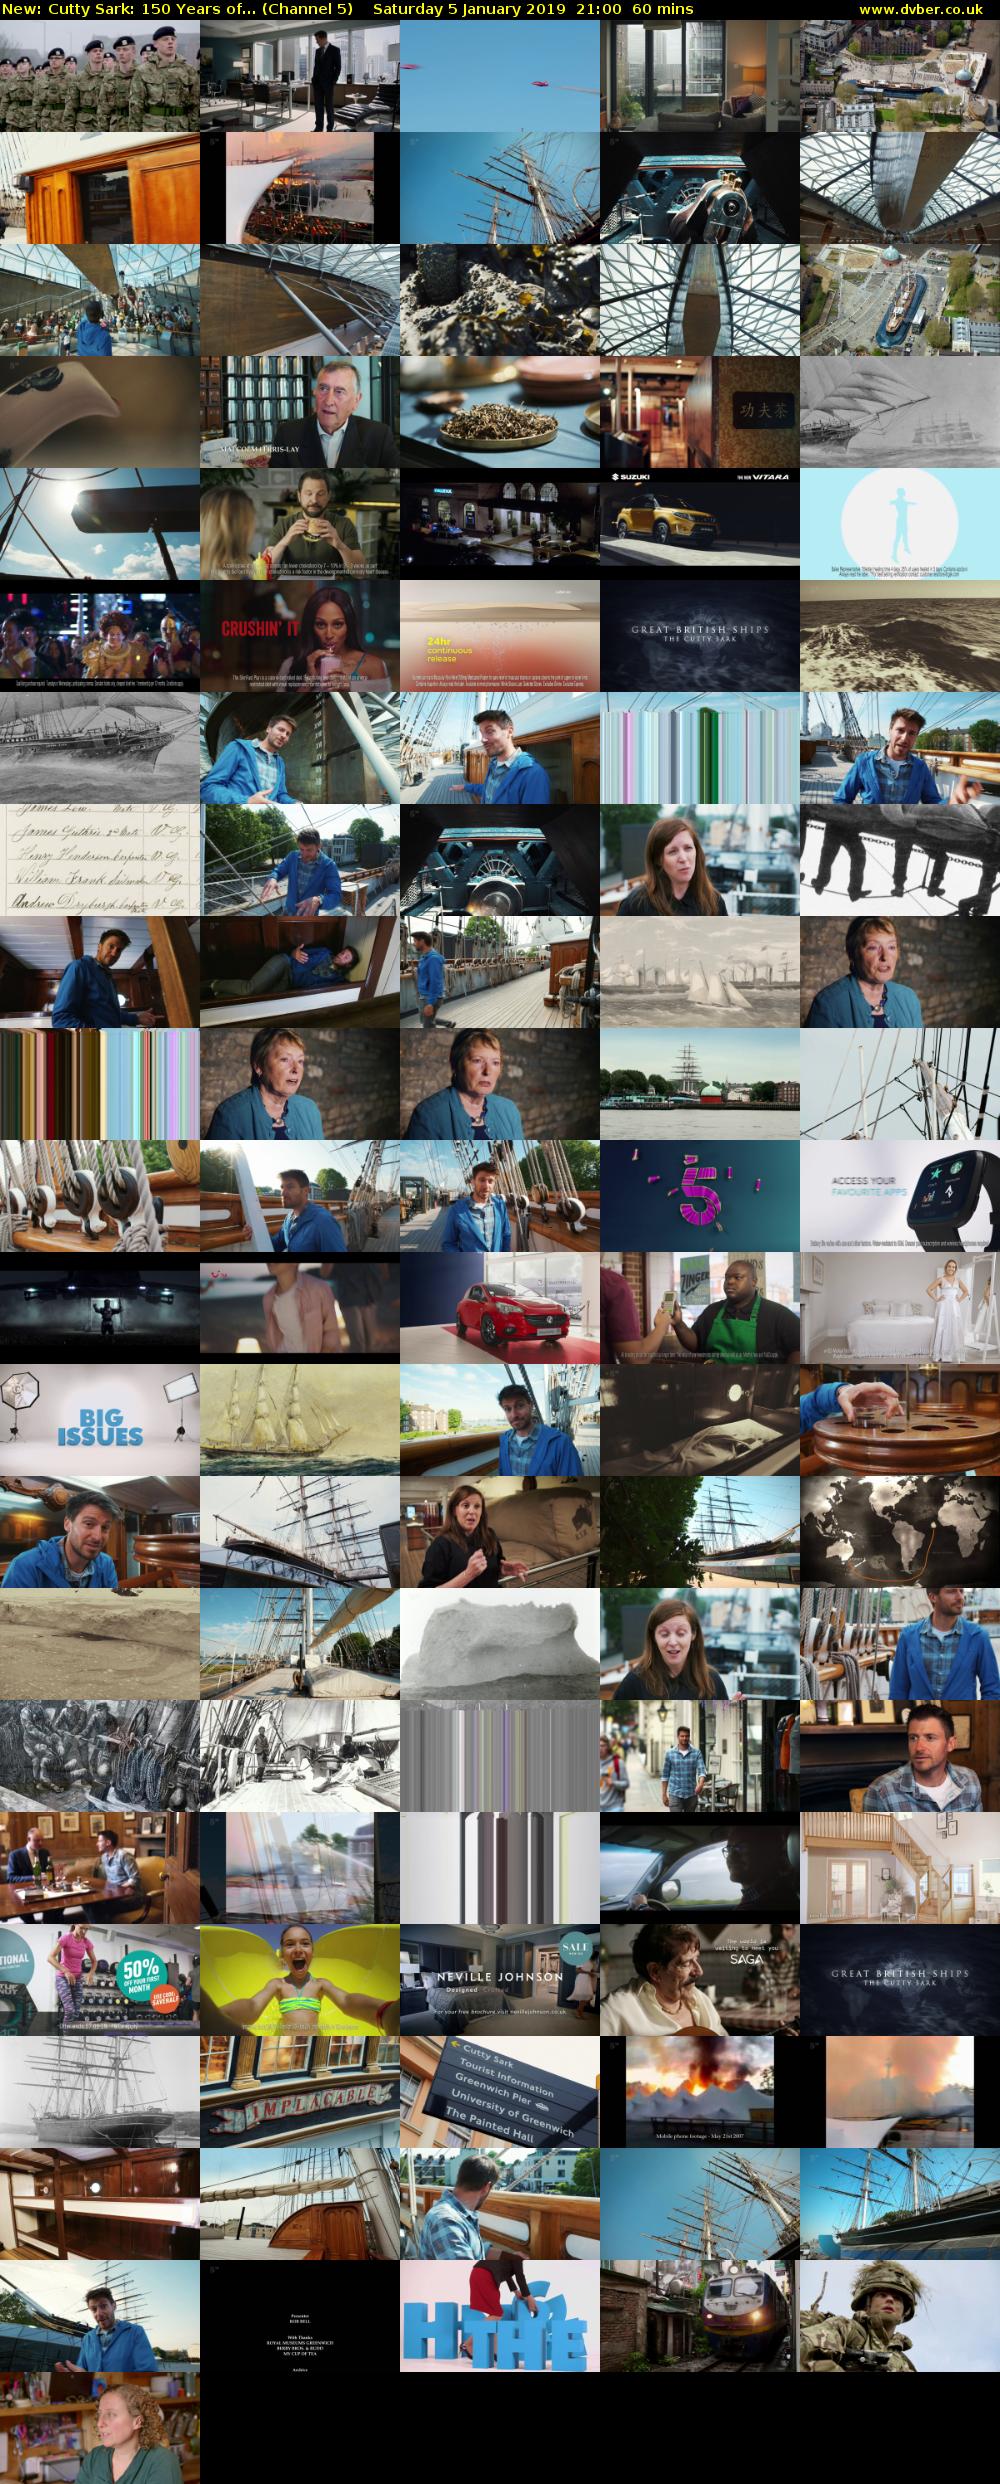 Cutty Sark: 150 Years of... (Channel 5) Saturday 5 January 2019 21:00 - 22:00